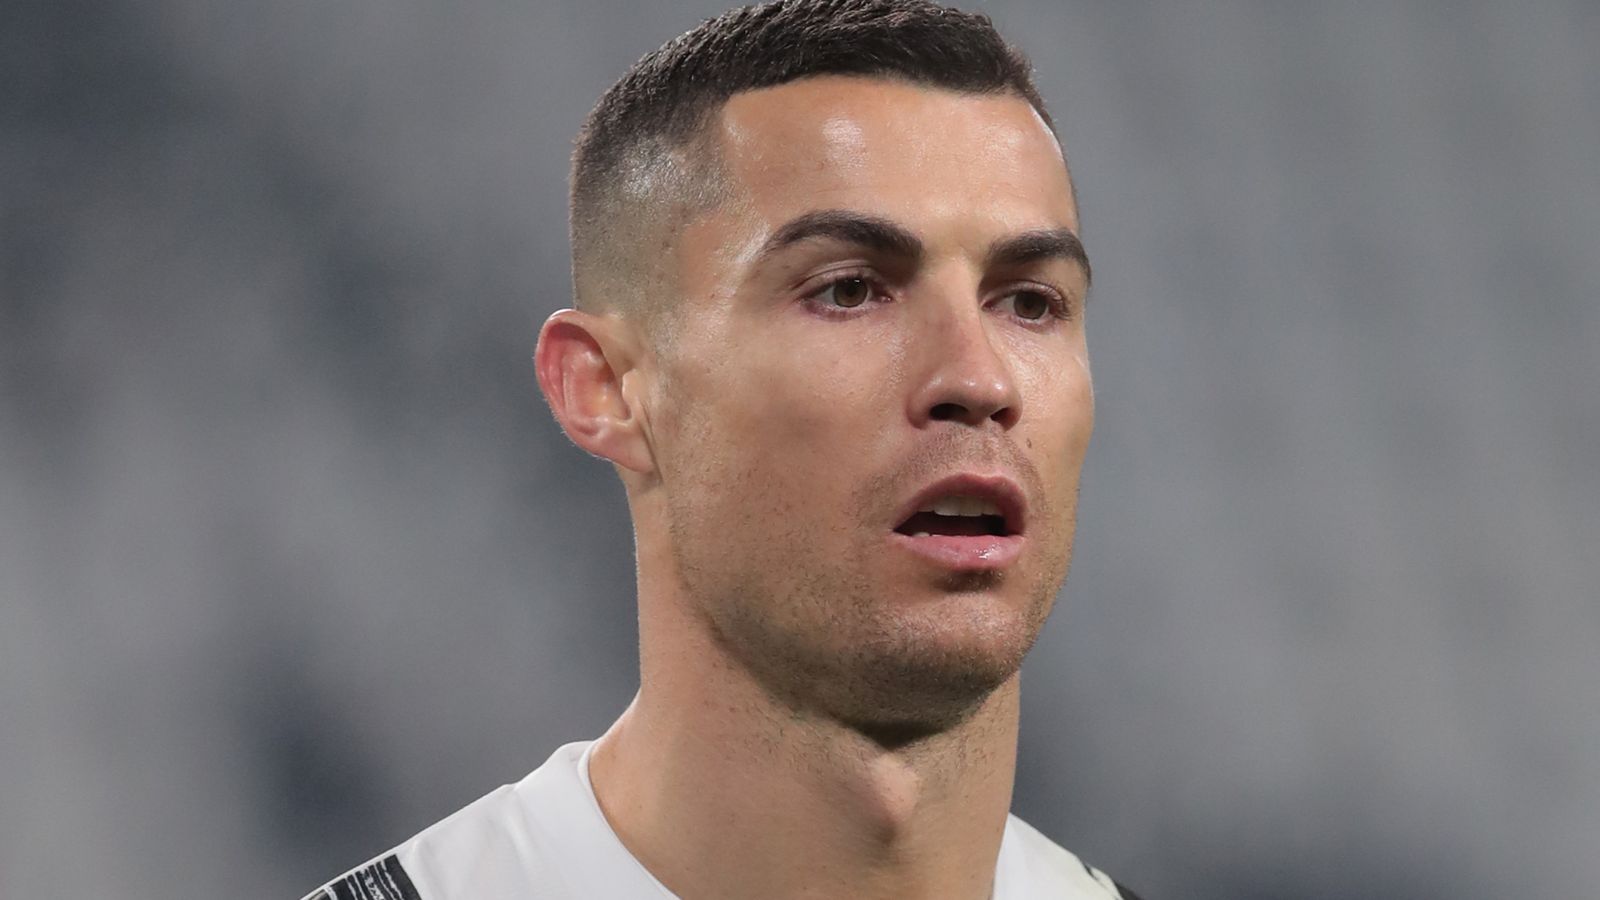 Cristiano Ronaldo: Juventus forward targeting 'many more years' and World  Cup glory with Portugal | Football News | Sky Sports